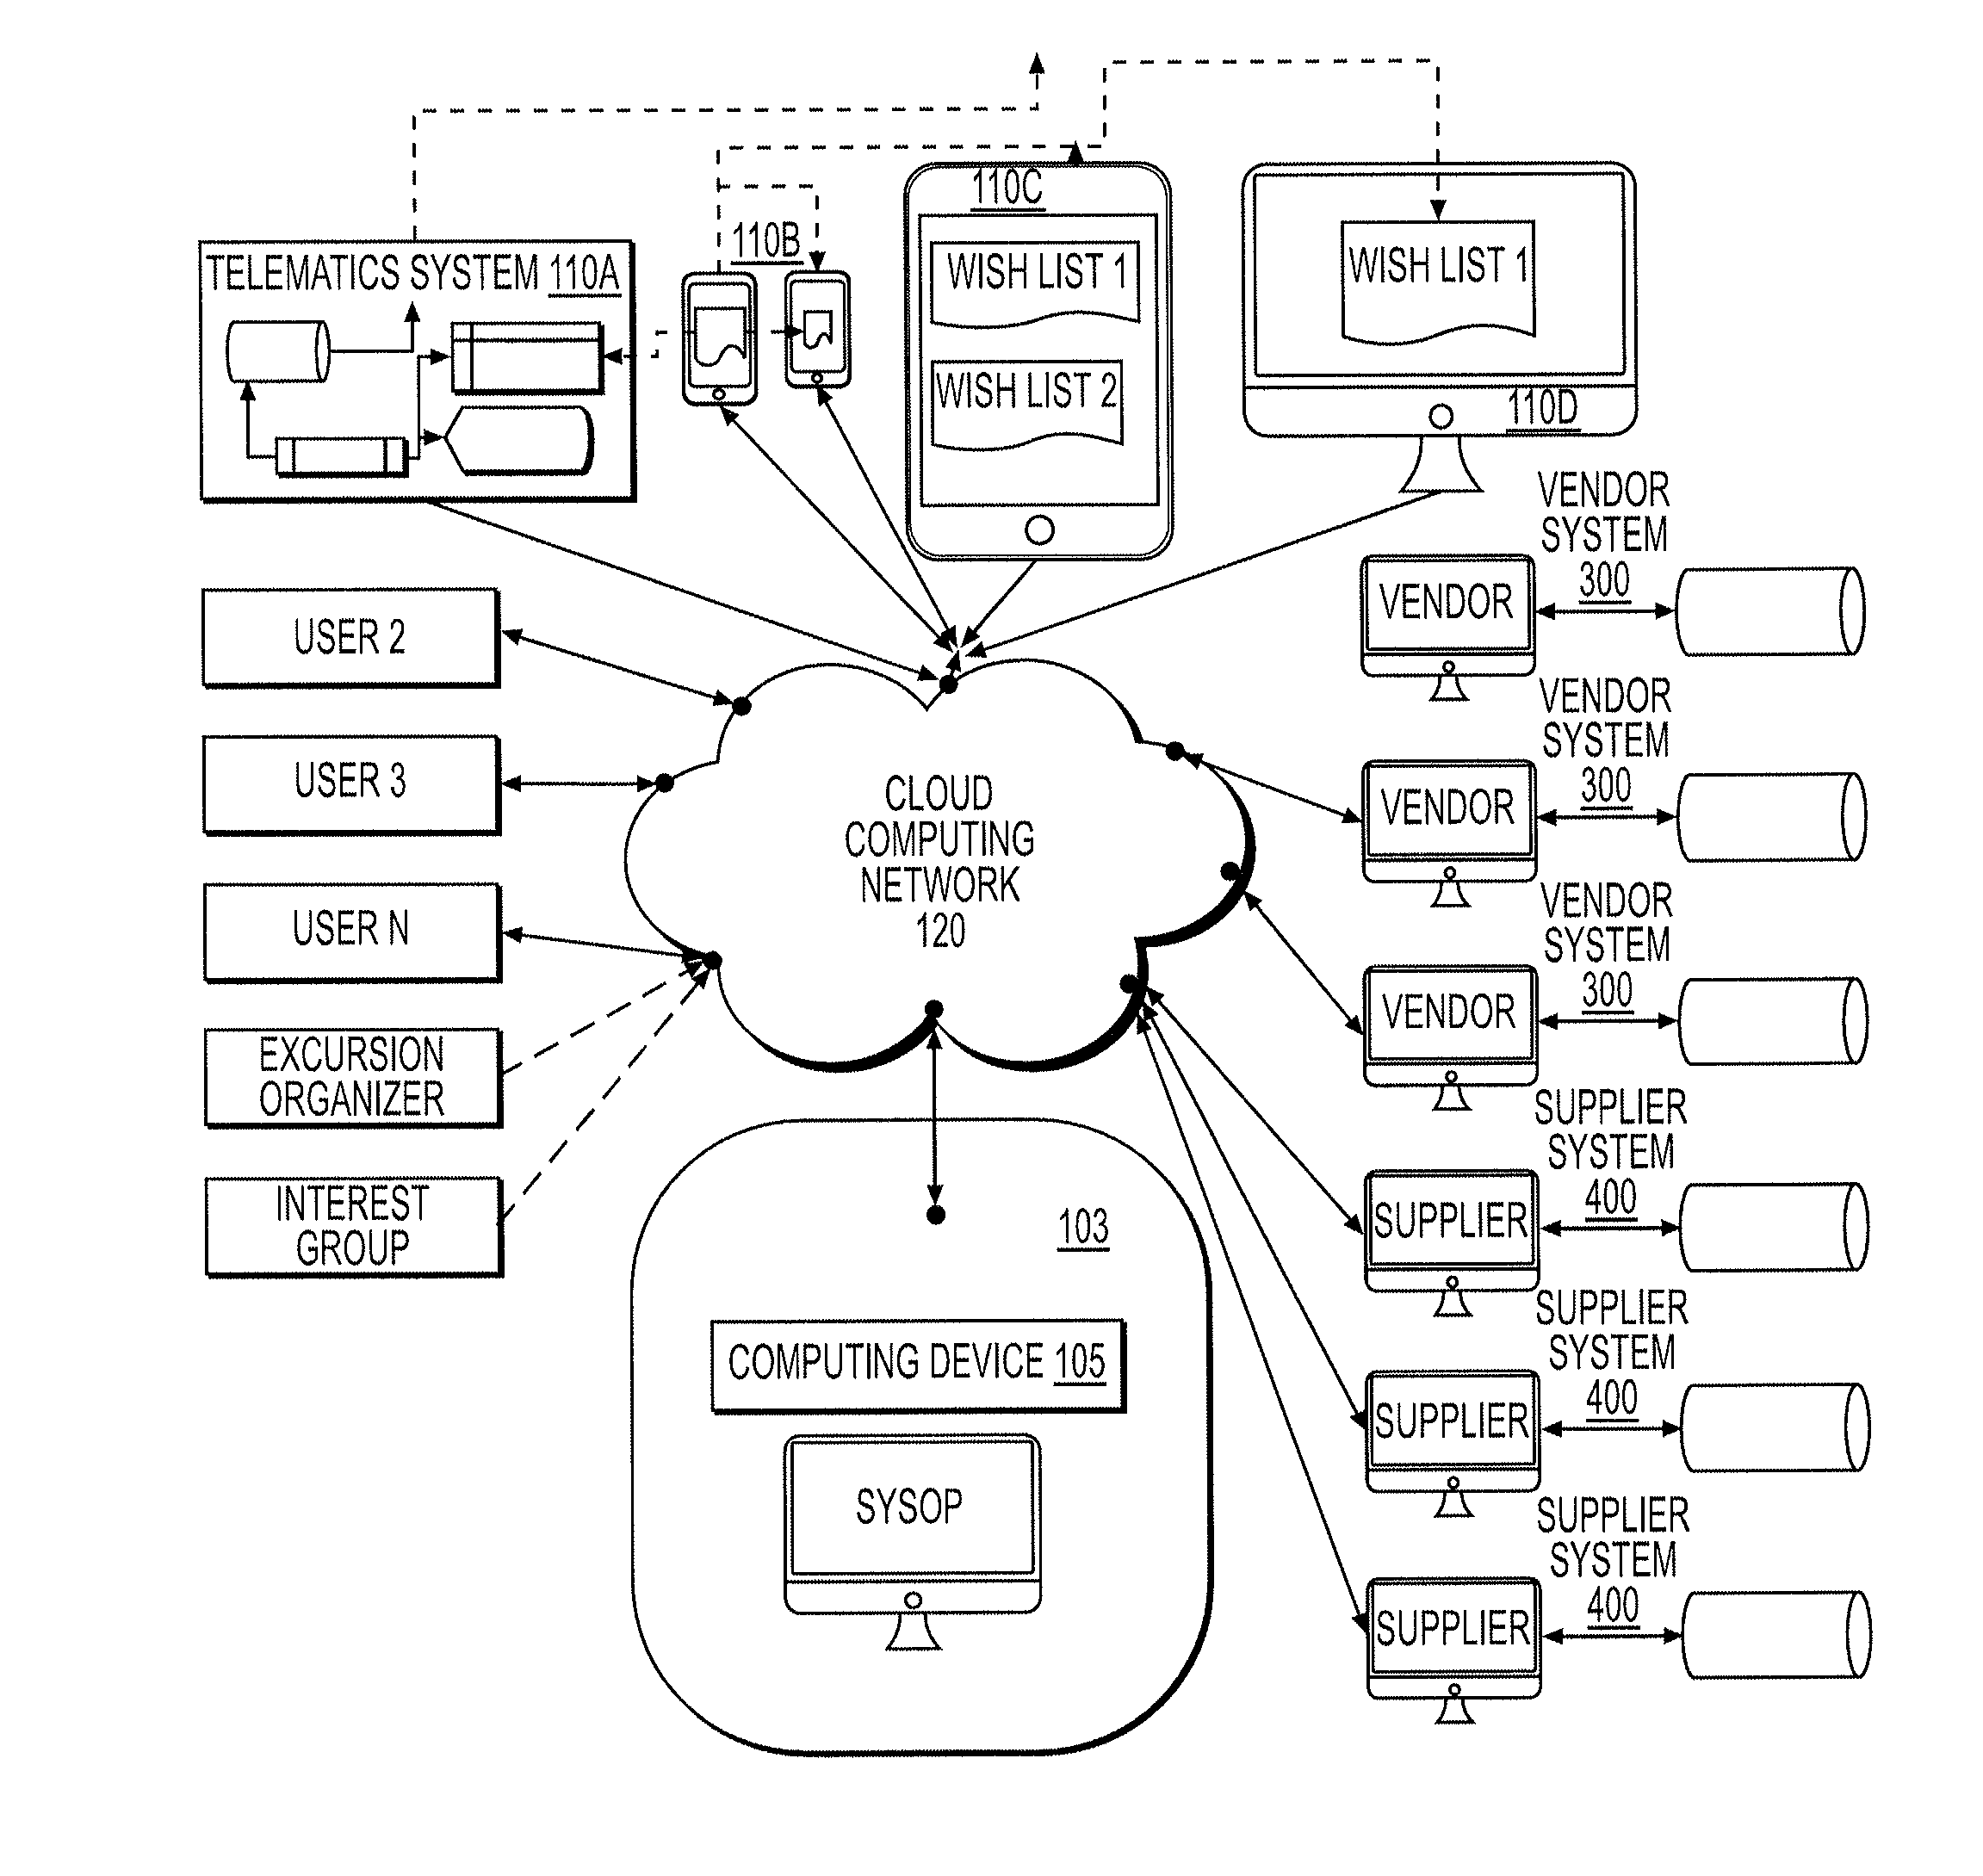 Communications system and smart device APPS supporting segmented order distributed distribution system